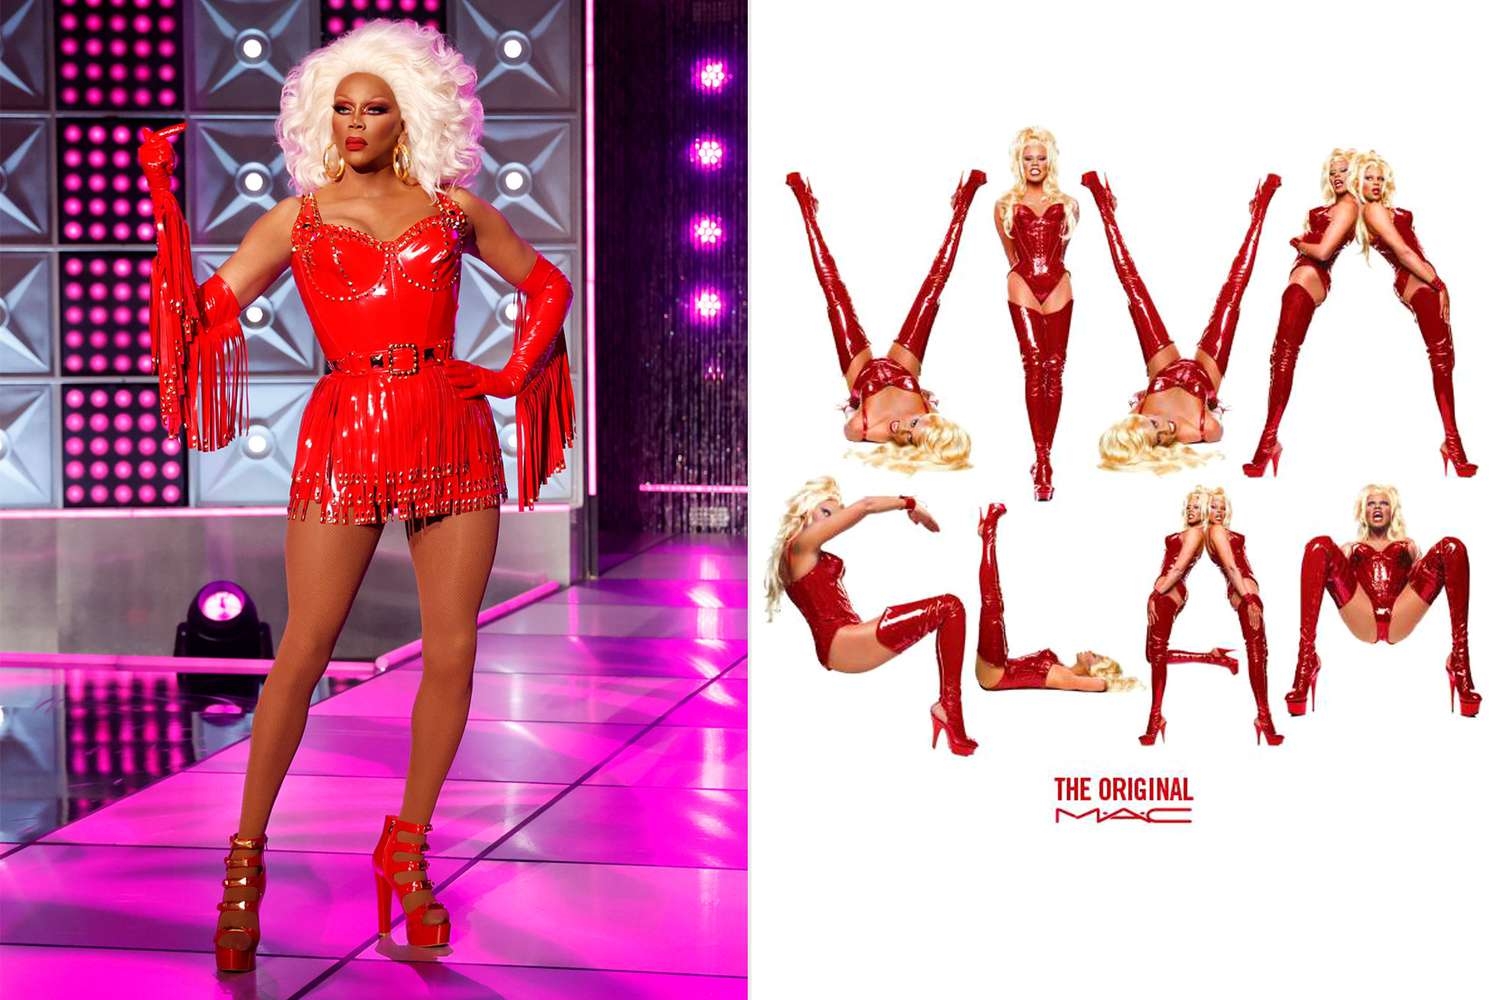 RuPaul on RuPaul's Drag Race and the 1994 Viva Glam campaign